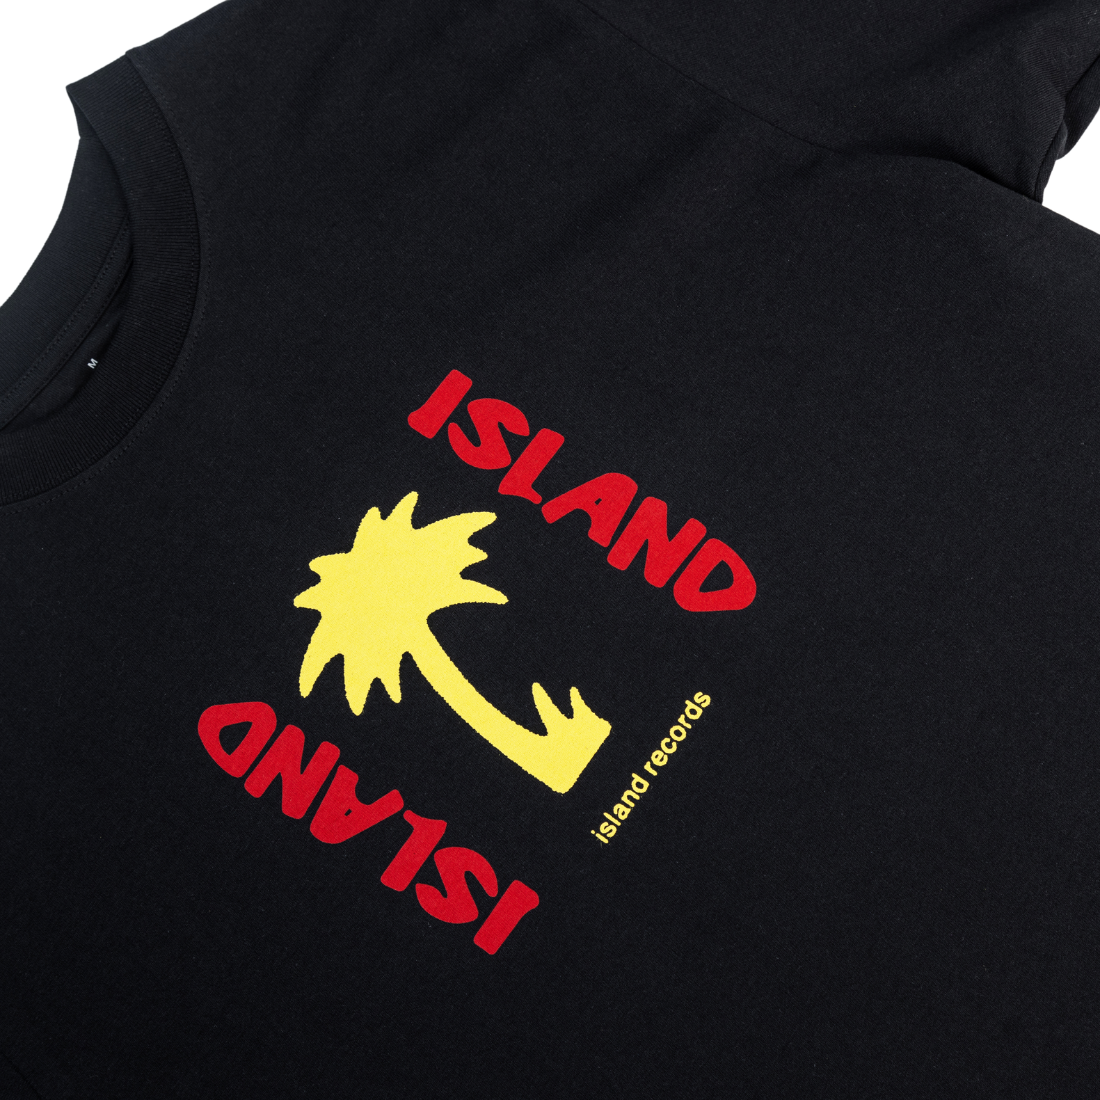 Island Records - Black Front Palm T-shirt